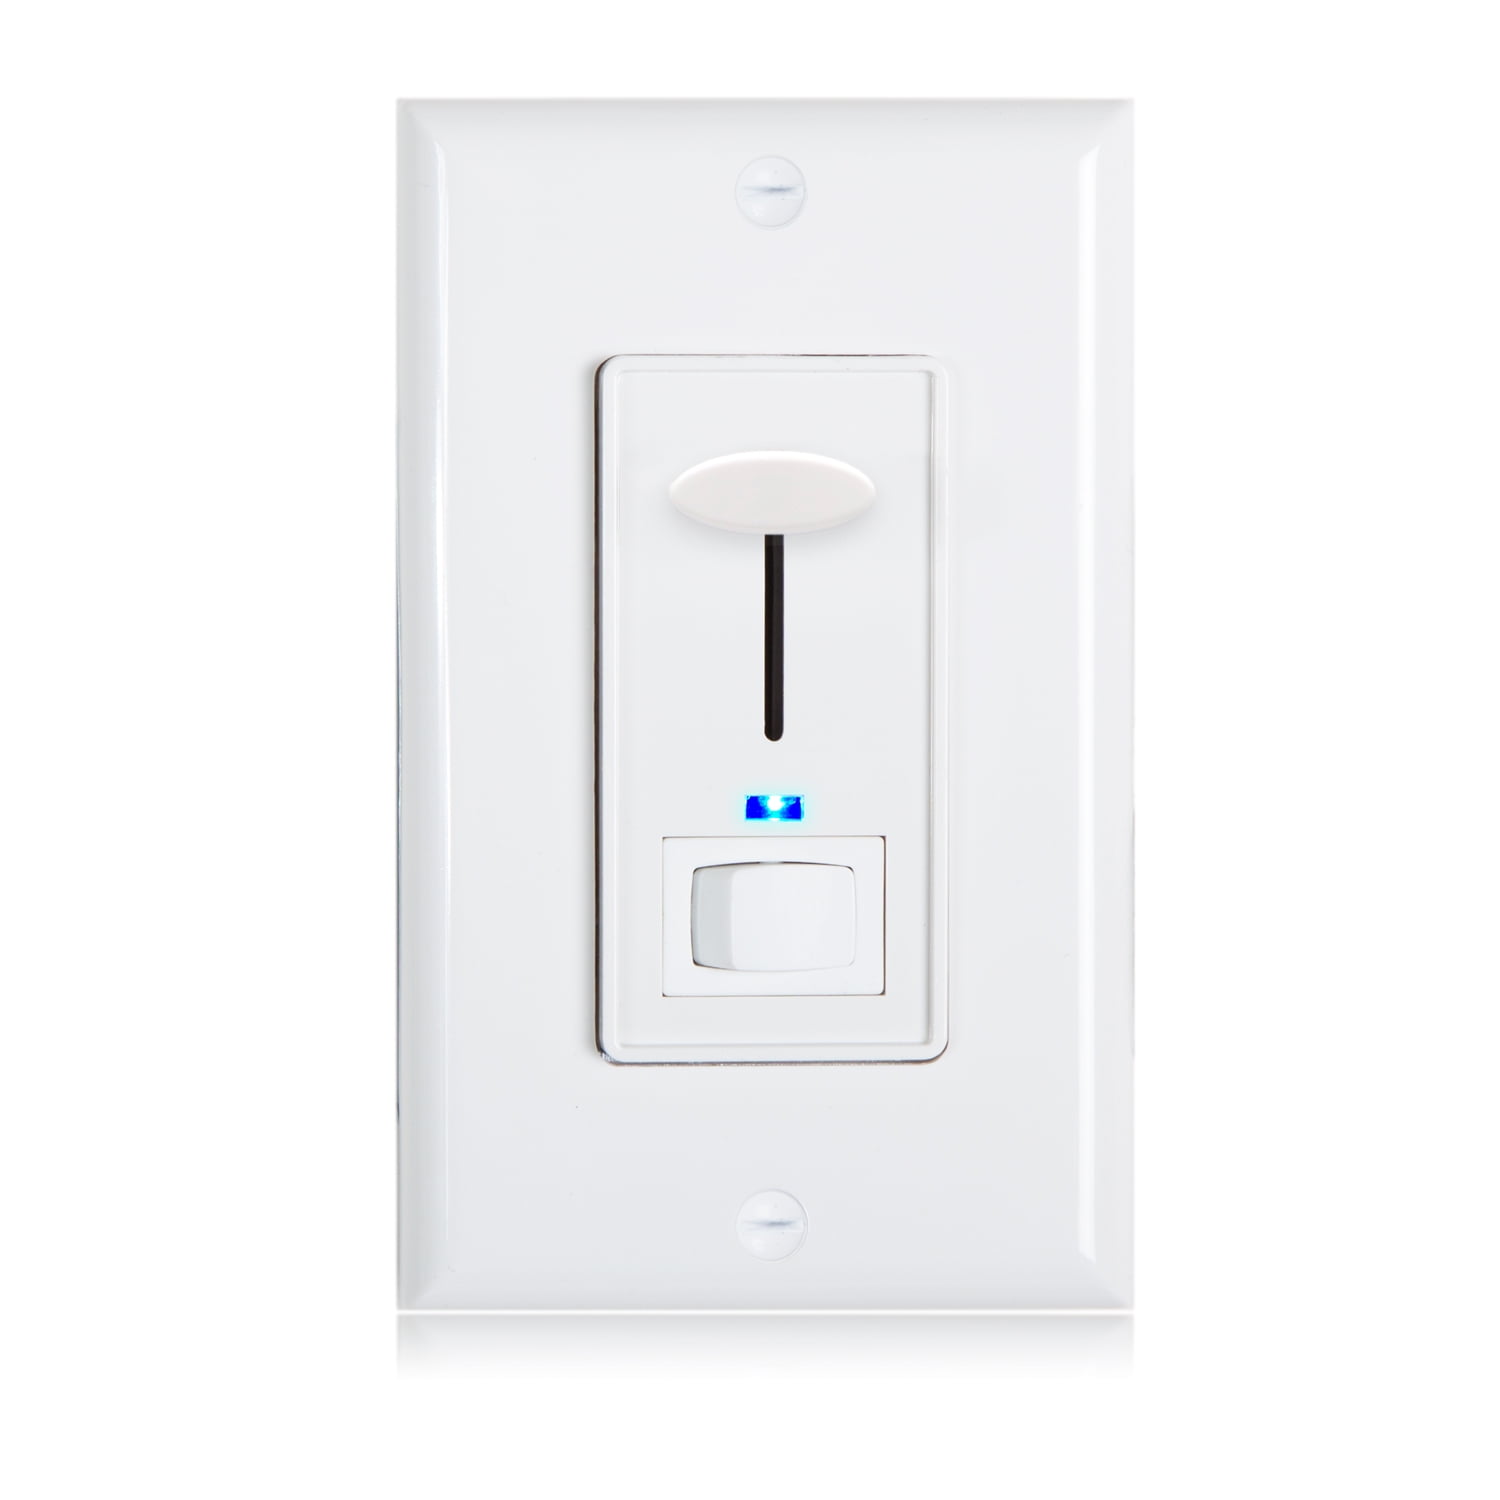 Maima Dimmer Electrical Light Switch